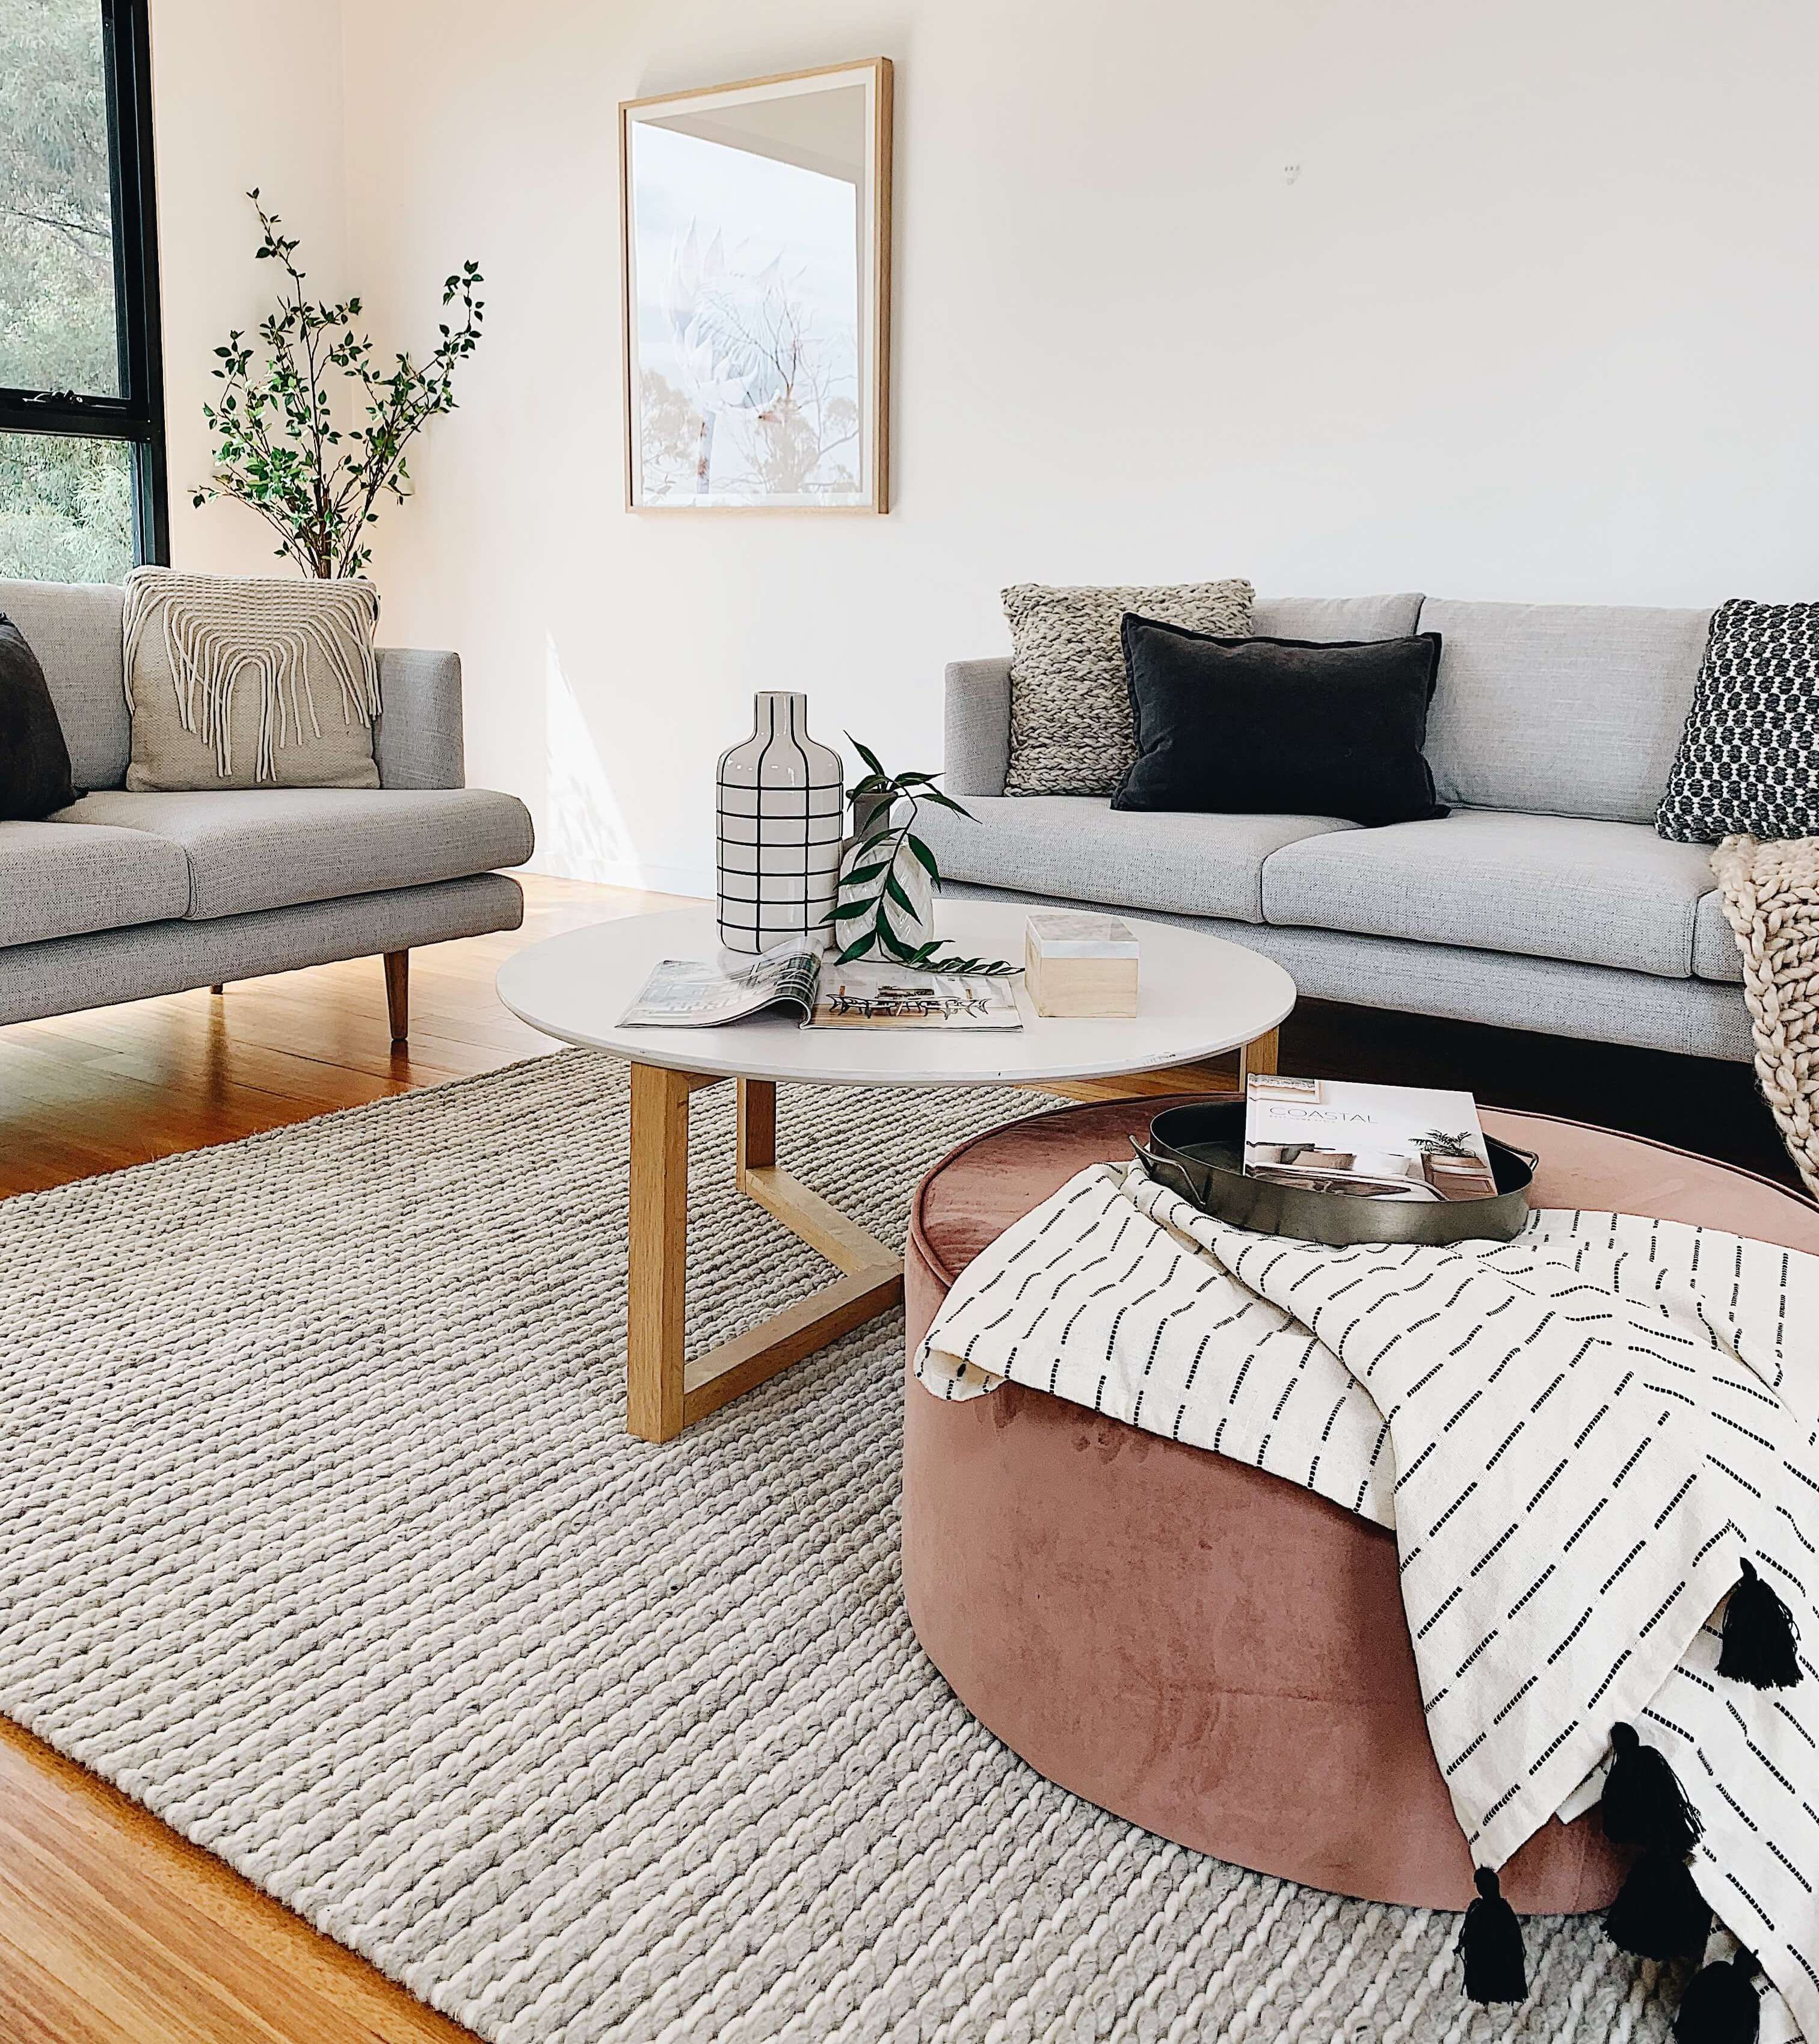 How to Choose a Living Room Rug